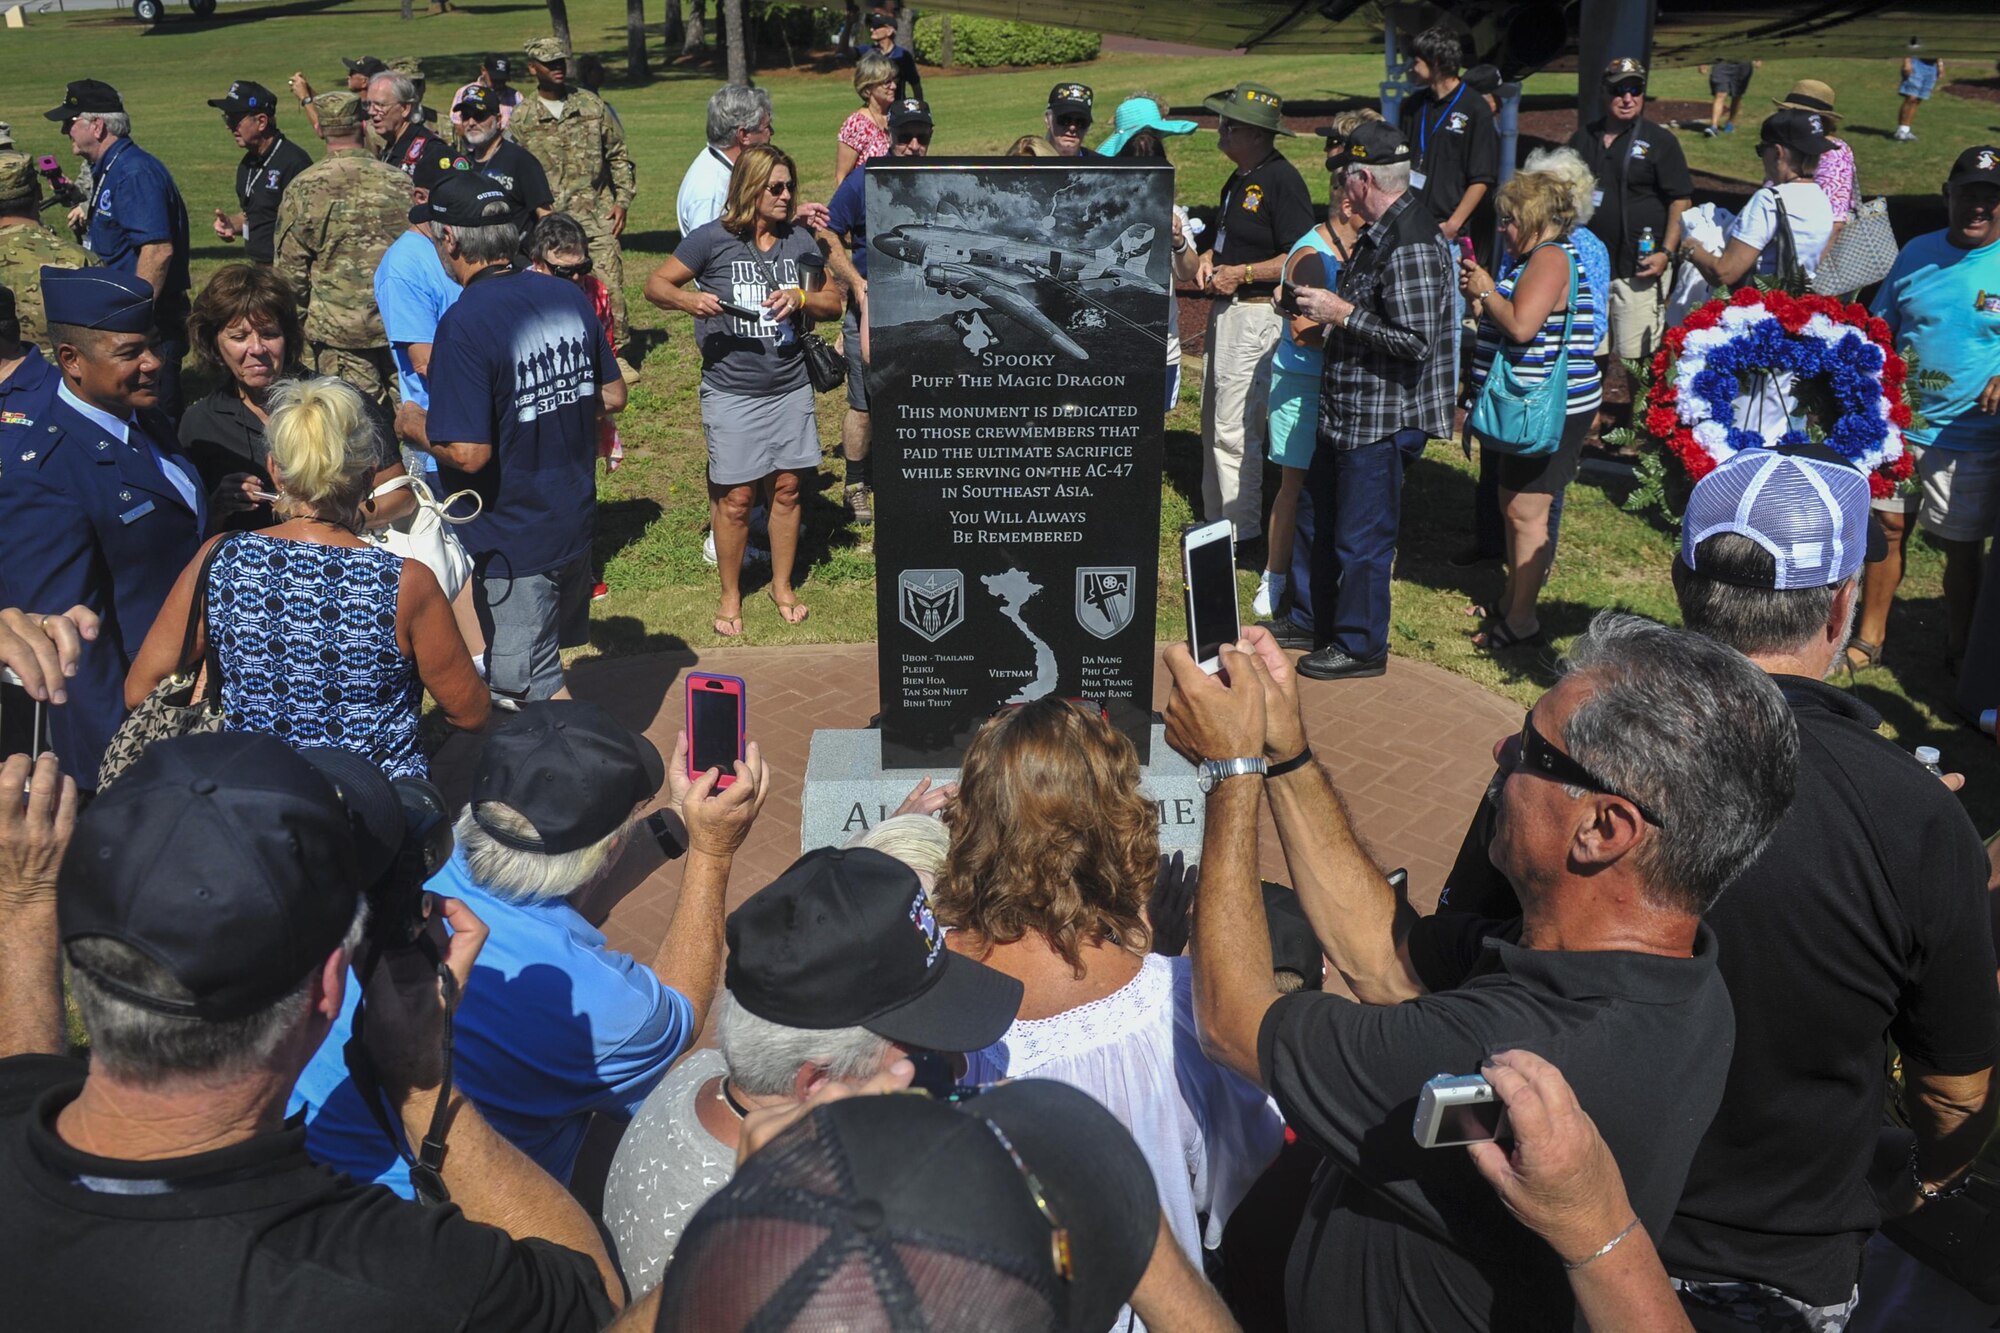 Members of the AC-47 Spooky Gunship Brotherhood mingle around a new plaque after a dedication ceremony at the Hurlburt Field Air Park, Fla., Sept. 9, 2016. The Spooky brotherhood purchased the memorial plaque with the names of fallen AC-47 crewmembers, who served in Southeast Asia. (U.S. Air Force photo by Airman Dennis Spain)
